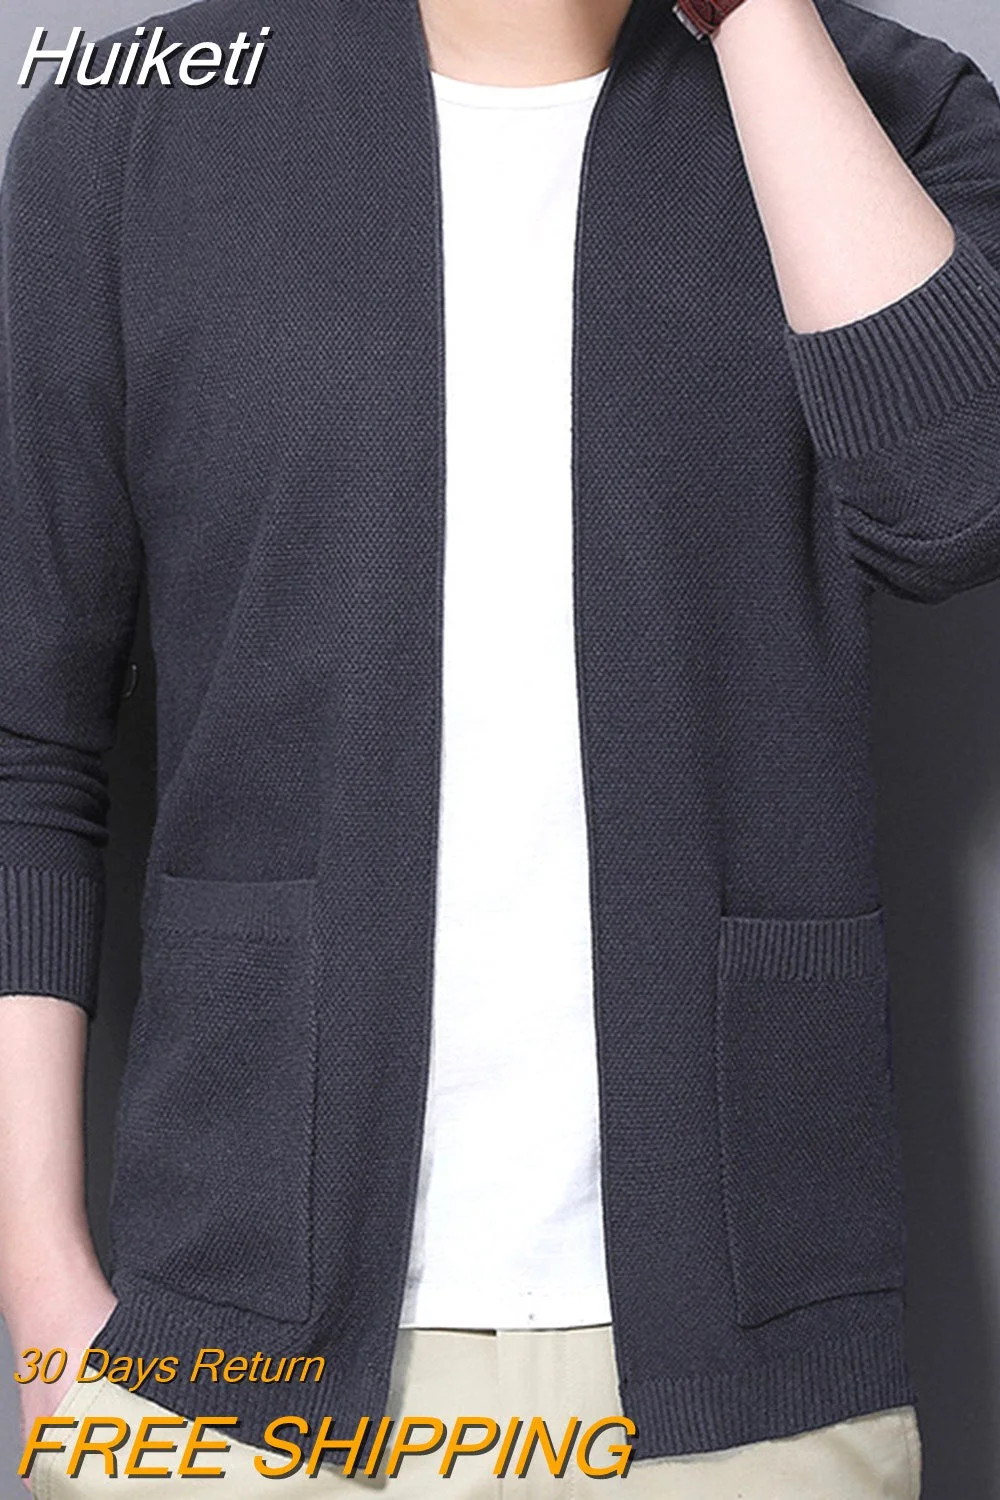 Huiketi Men Cardigan Fashion Dress Up Knitwear Sweater Mens Spring Autumn Thin Solid Sweatercoat V Neck Casual Male Knitted Cardigan